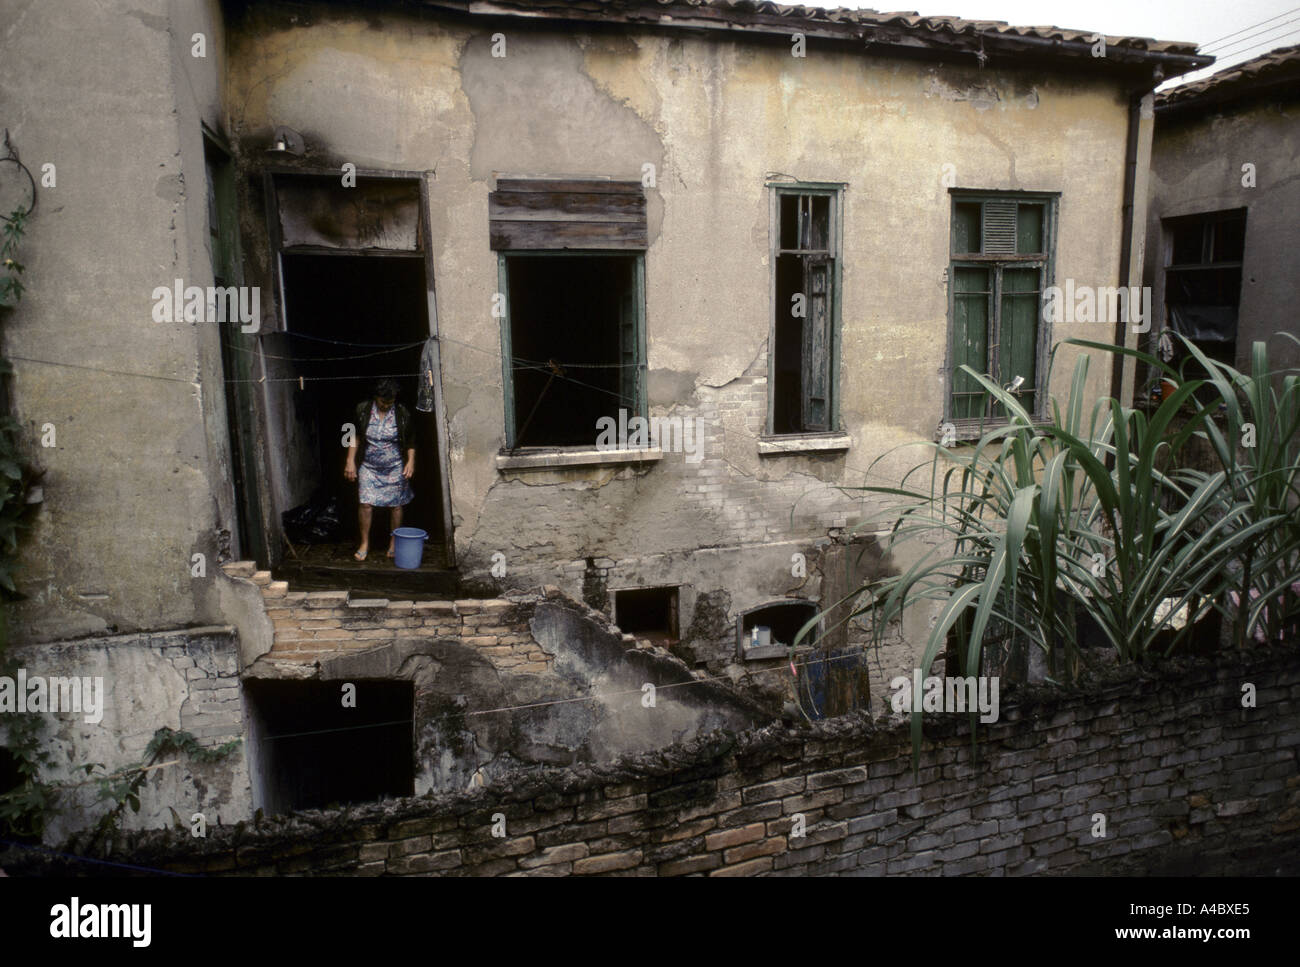 A woman in the doorway of her rented cortico housing - grand old houses divided into tiny rooms Sao Paulo Brazil Stock Photo